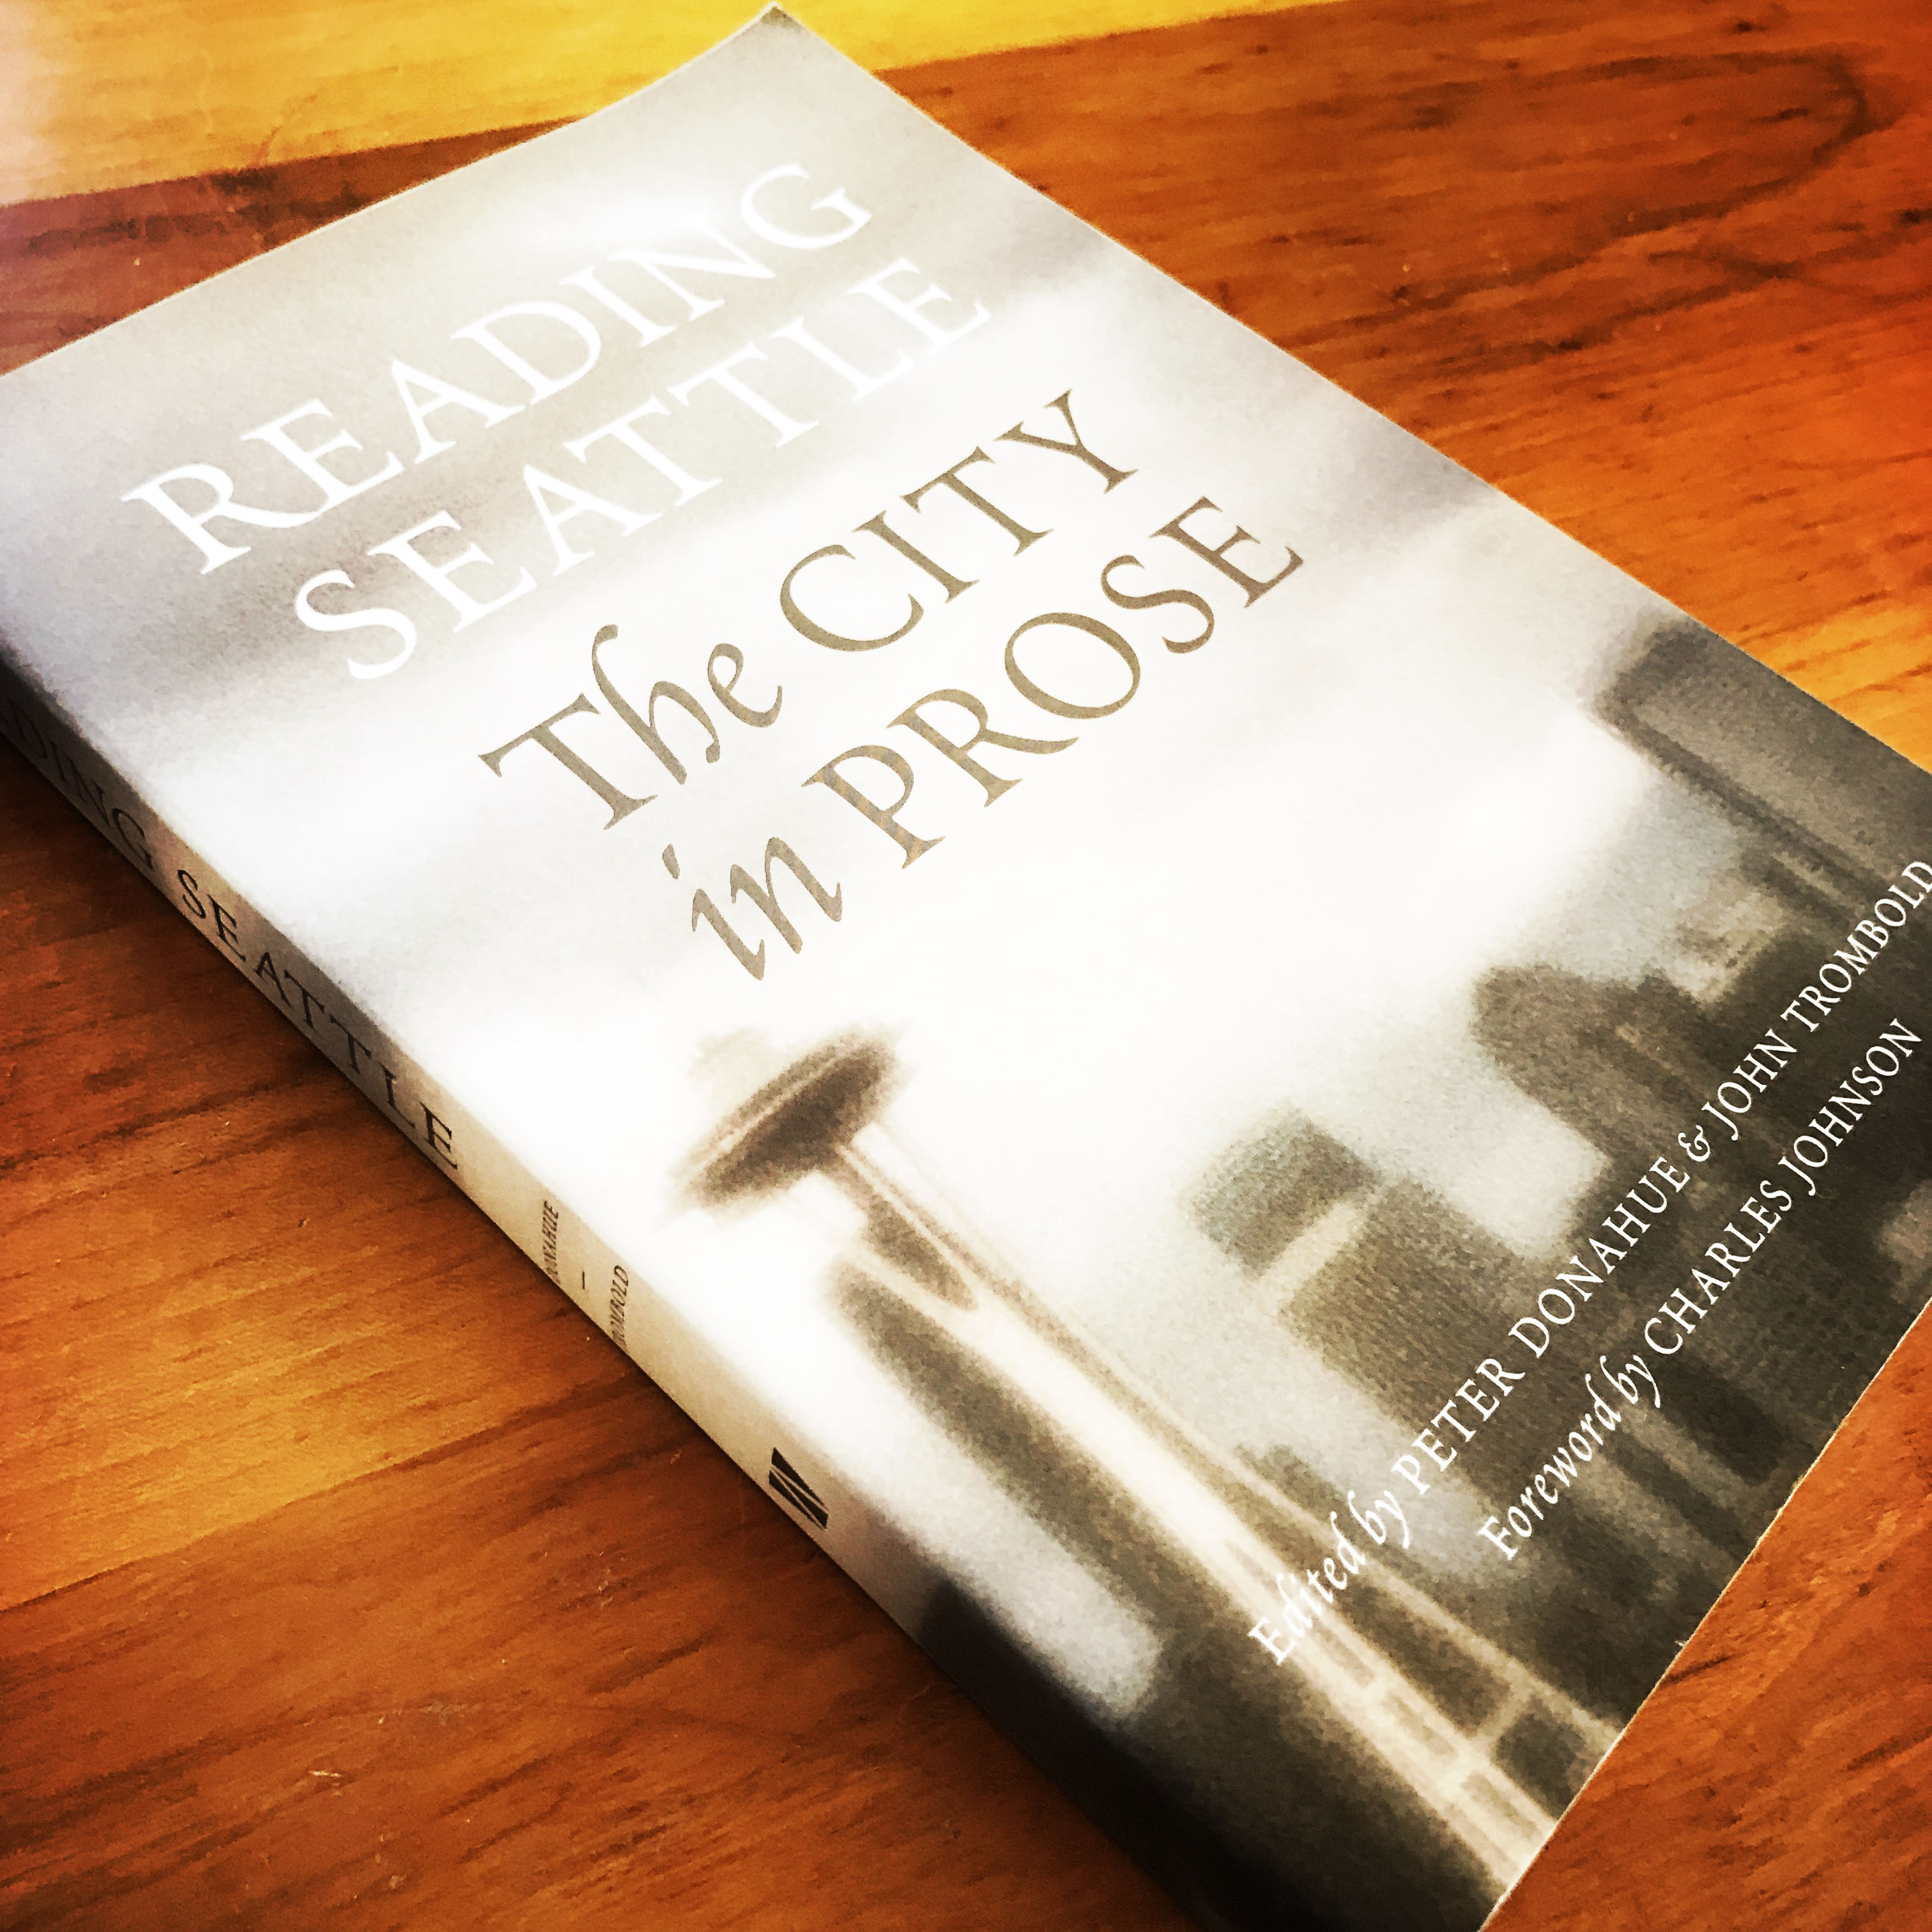 Reading Seattle: The City in Prose